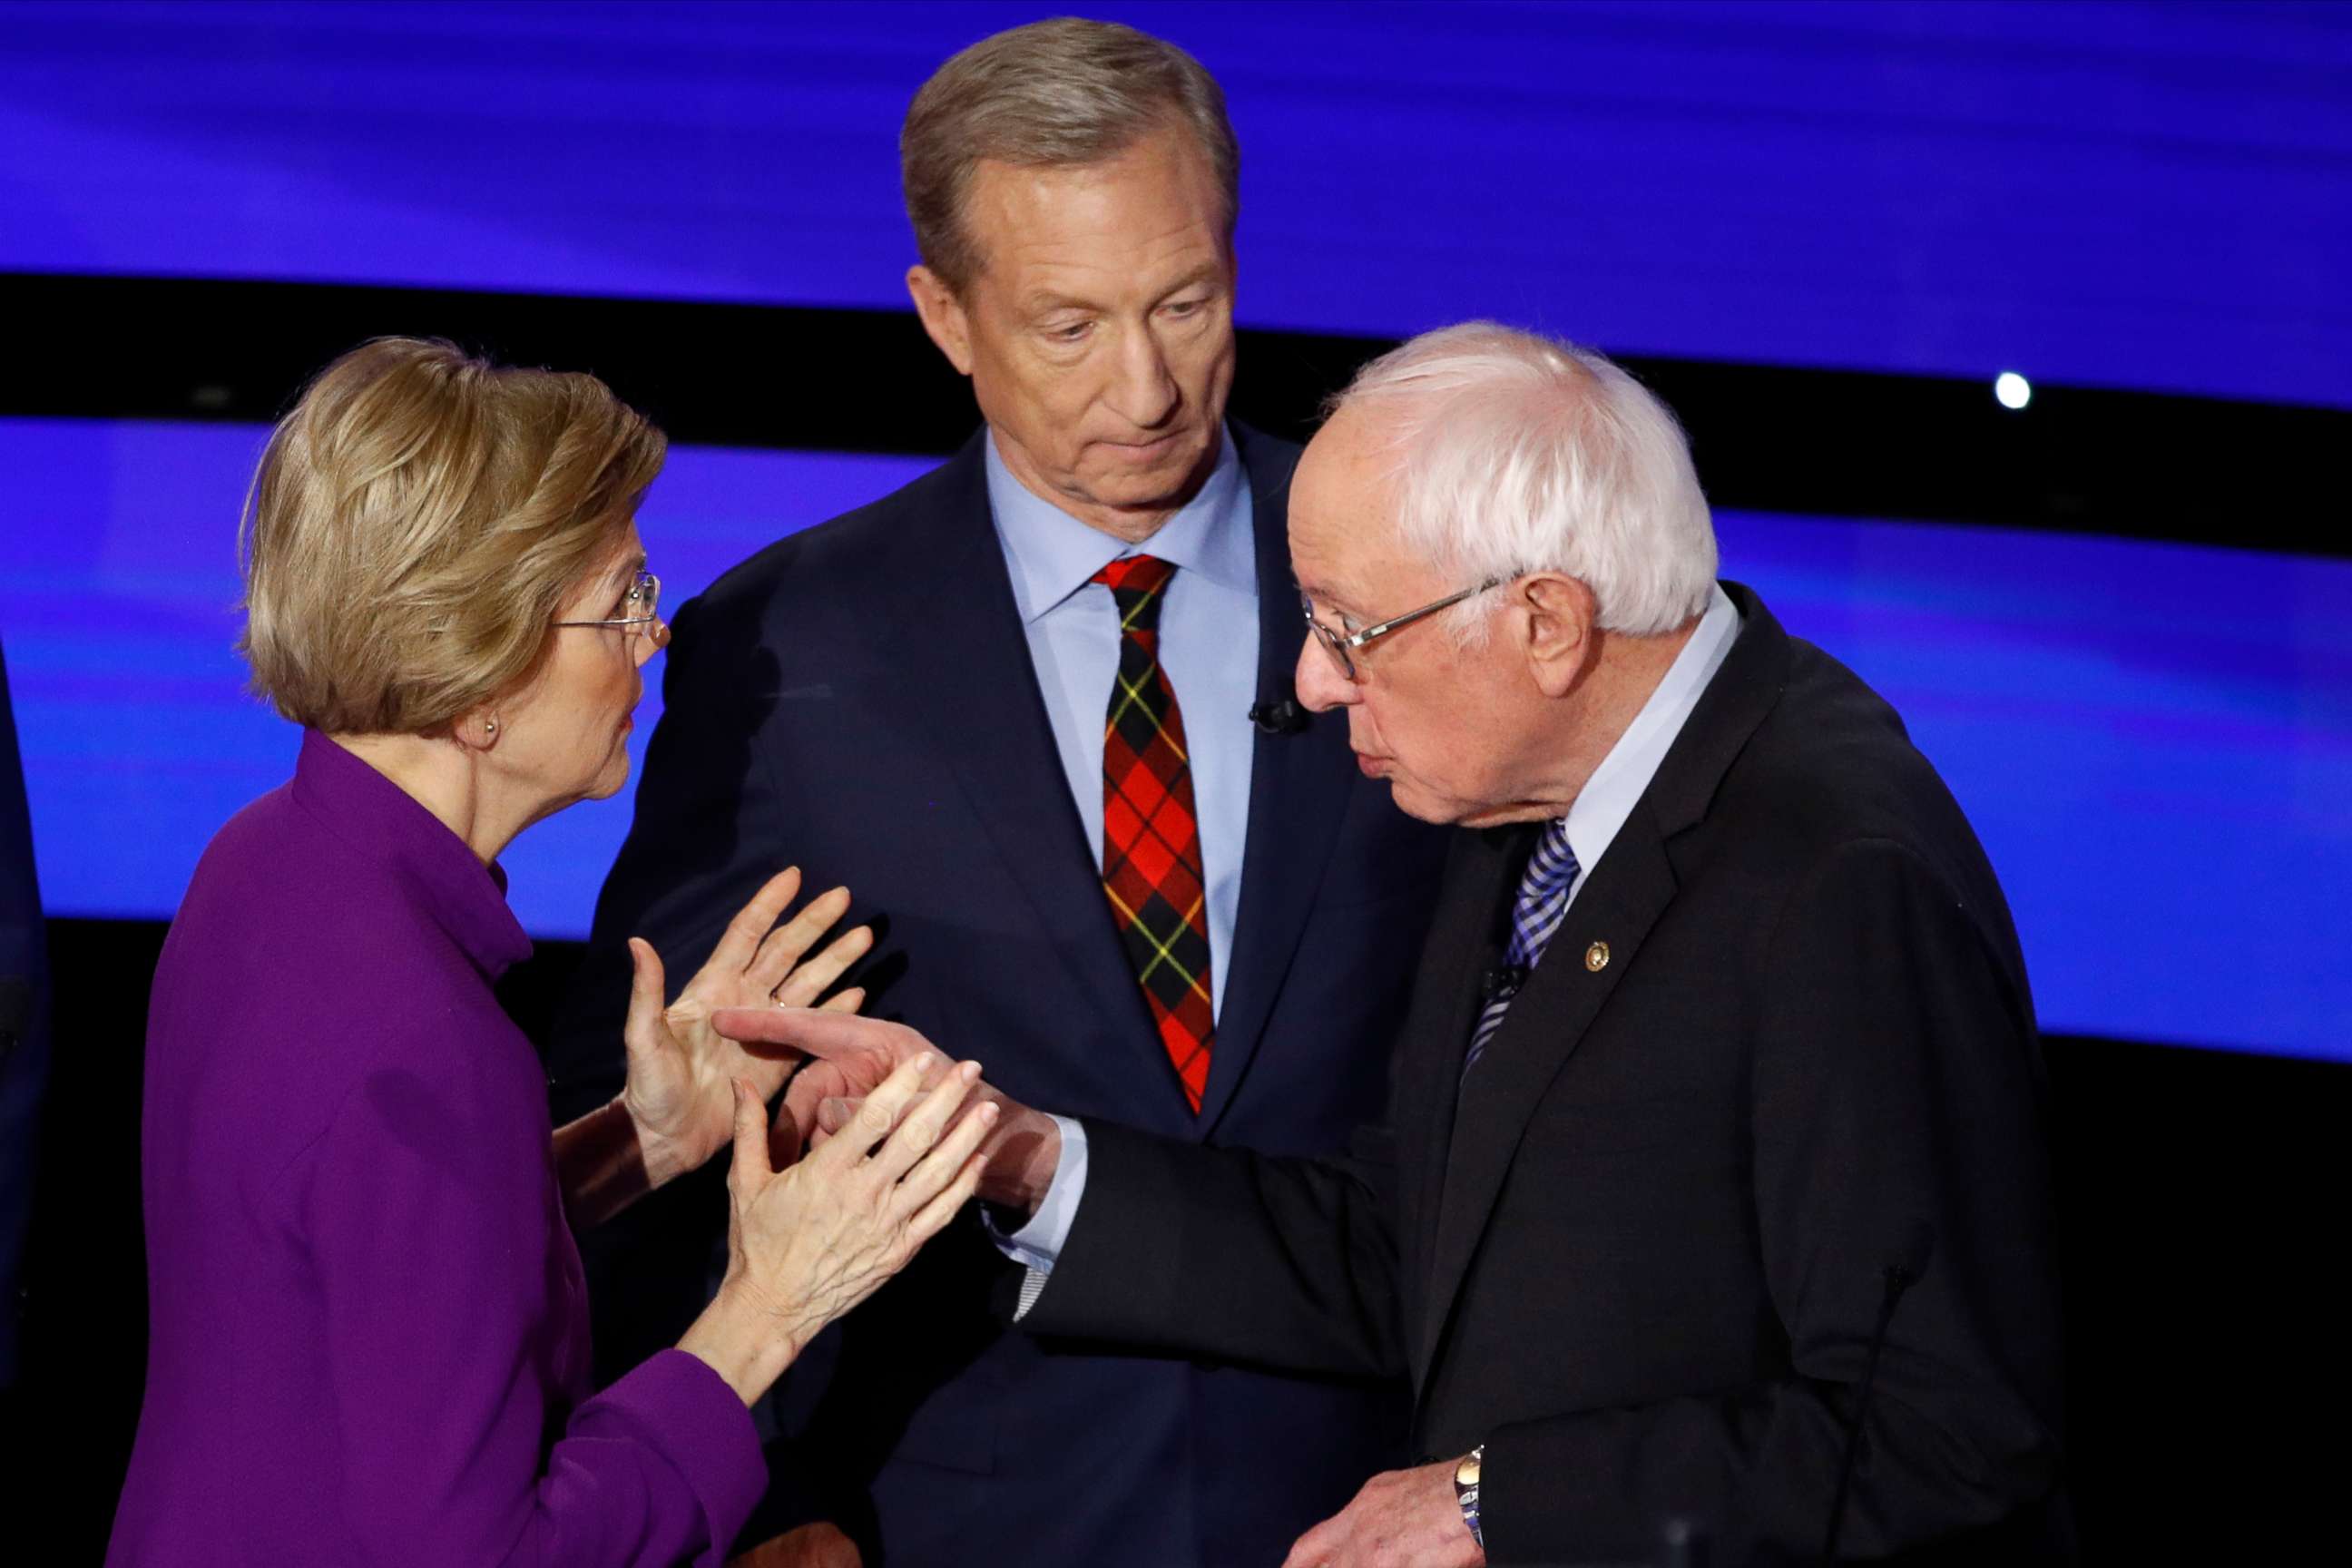 PHOTO: Sen. Elizabeth Warren and Sen. Bernie Sanders talk after a Democratic presidential primary debate hosted by CNN and the Des Moines Register in Des Moines, Iowa, while candidate businessman Tom Steyer looks on, Jan. 14, 2020.